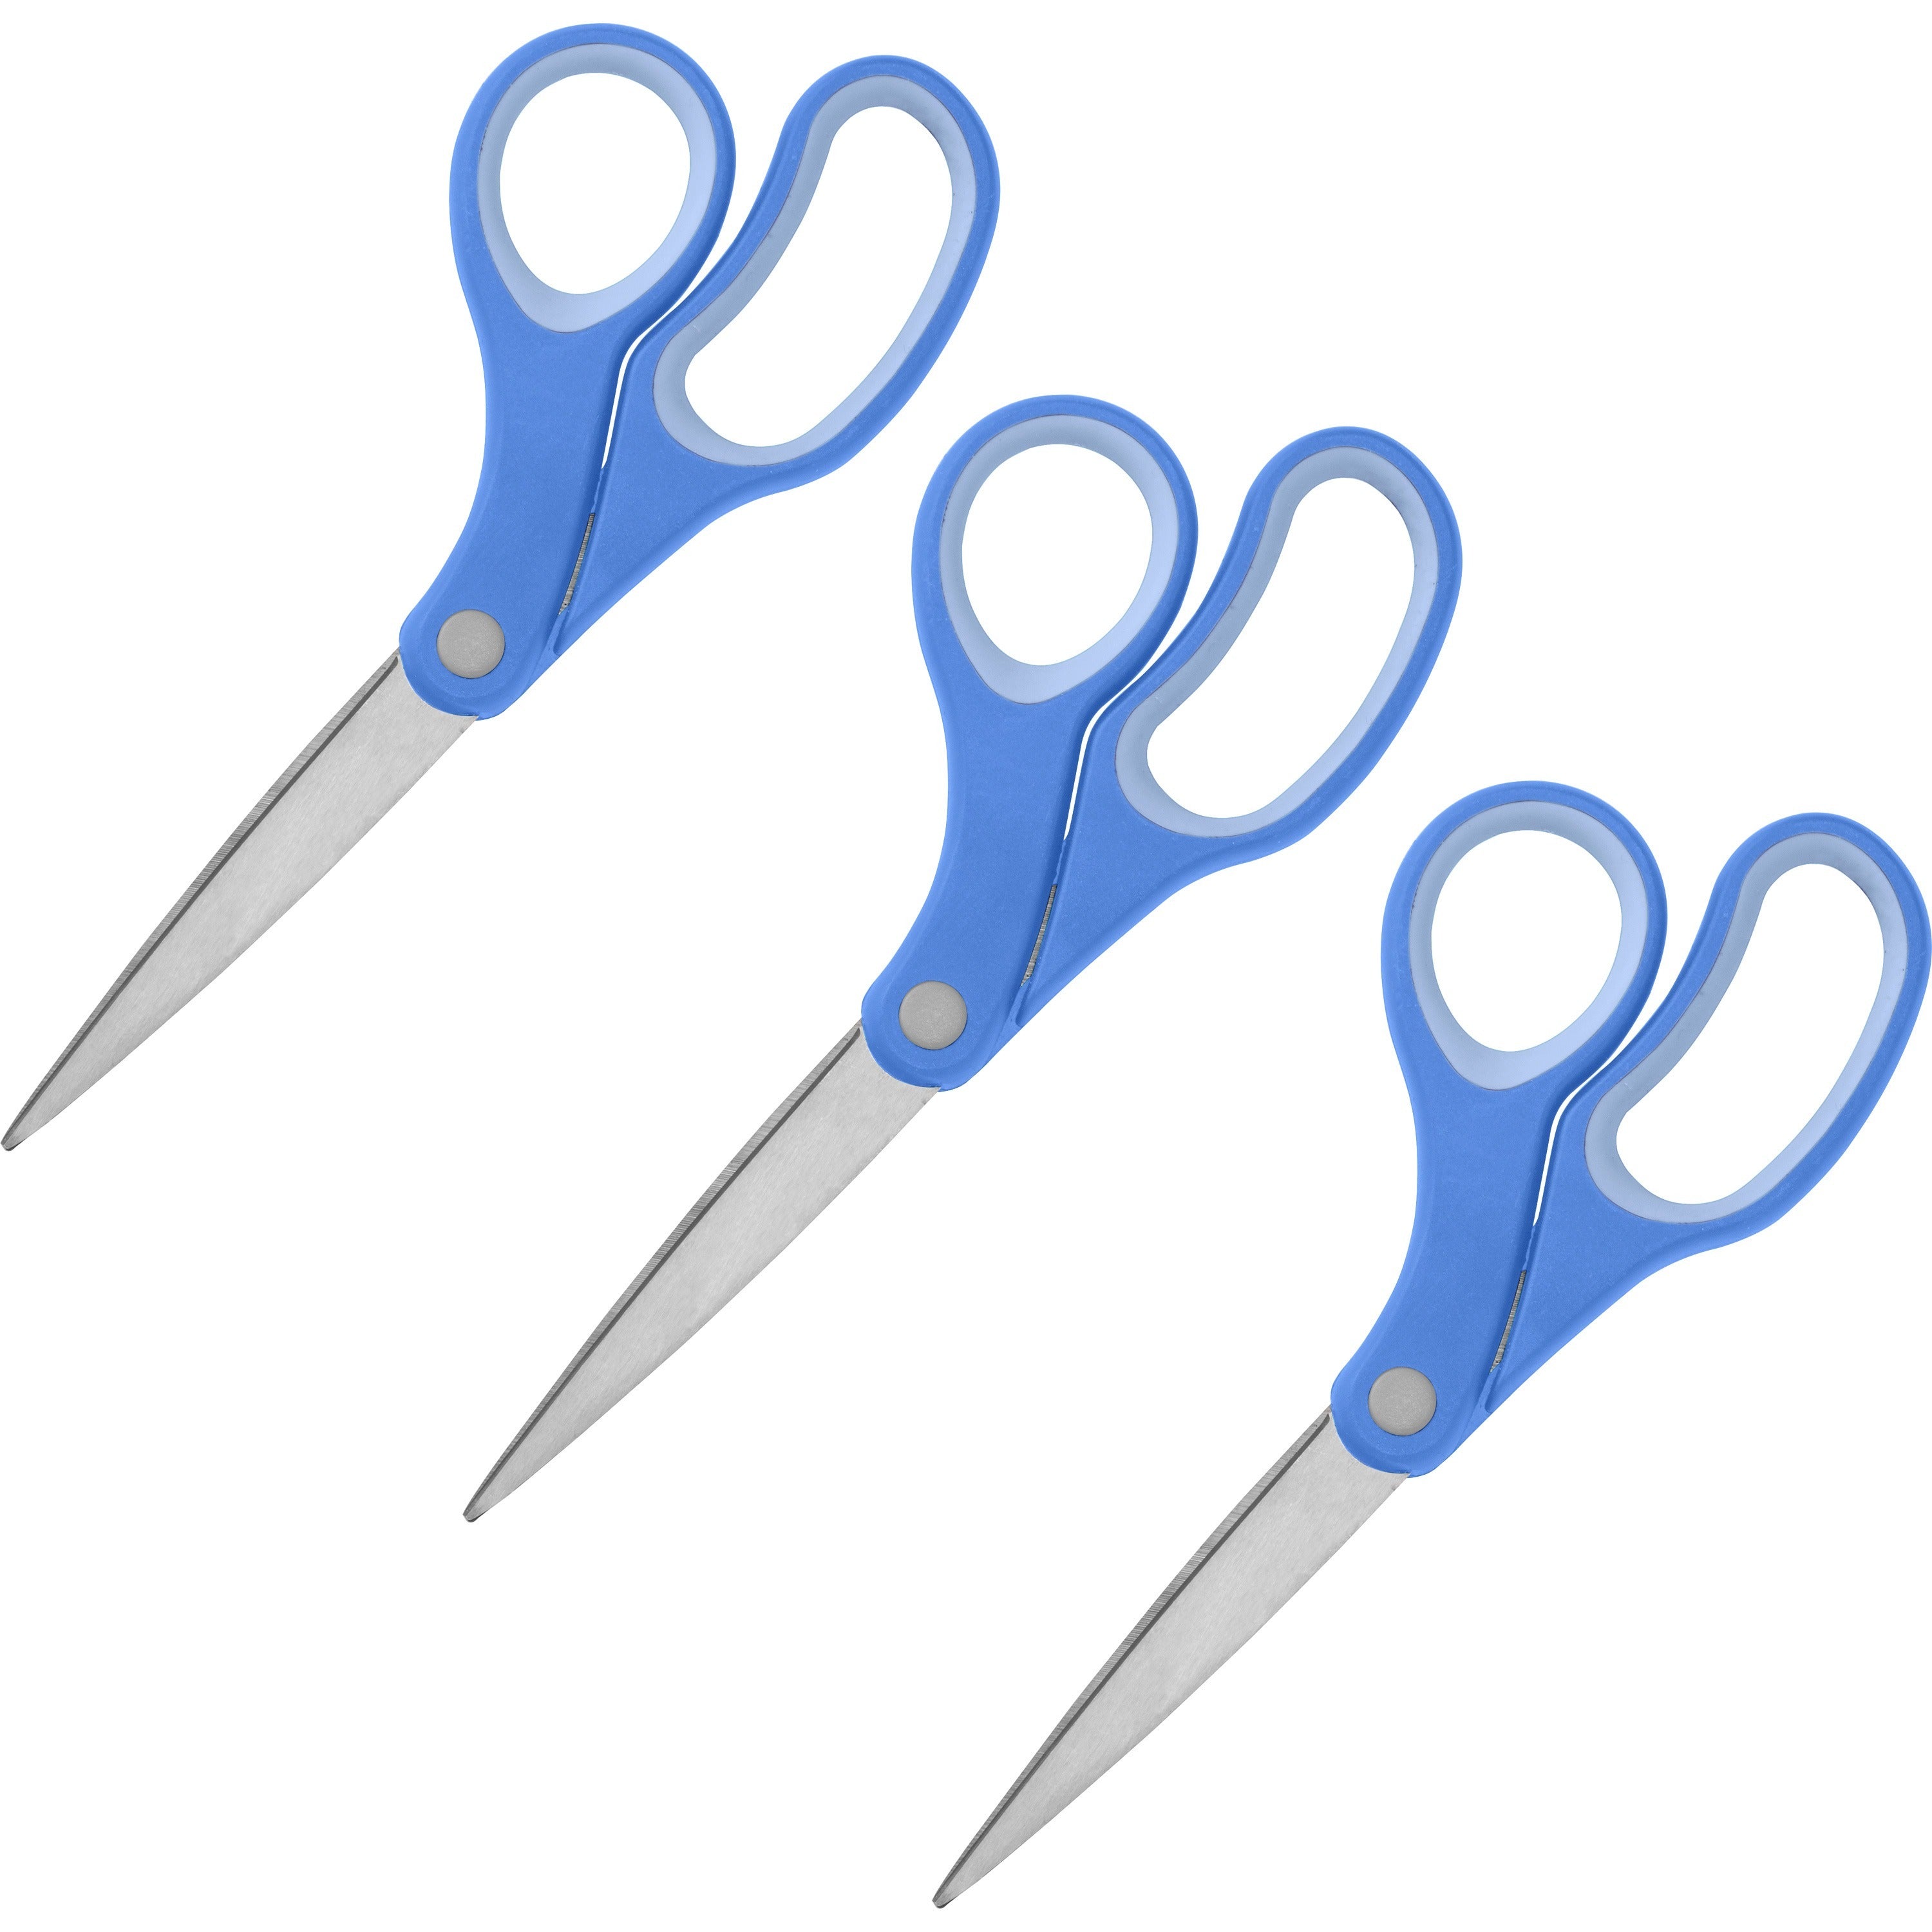 sparco-bent-multipurpose-scissors-8-overall-length-bent-stainless-steel-blue-3-bundle_spr39043bd - 1